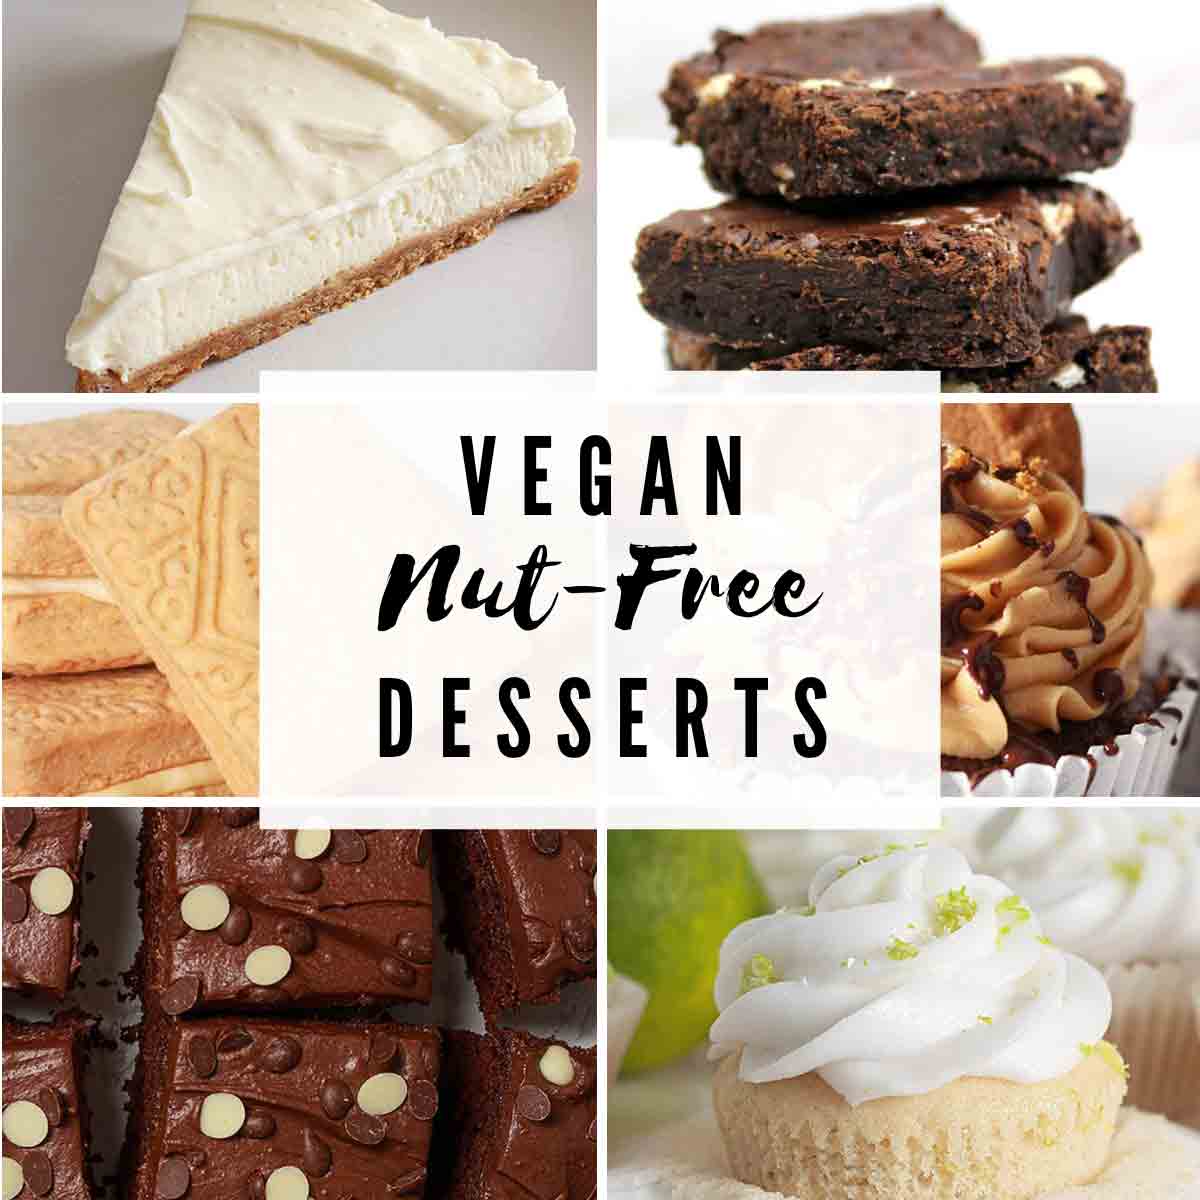 Image Collage With Nut Free Vegan Desserts Text Overlay